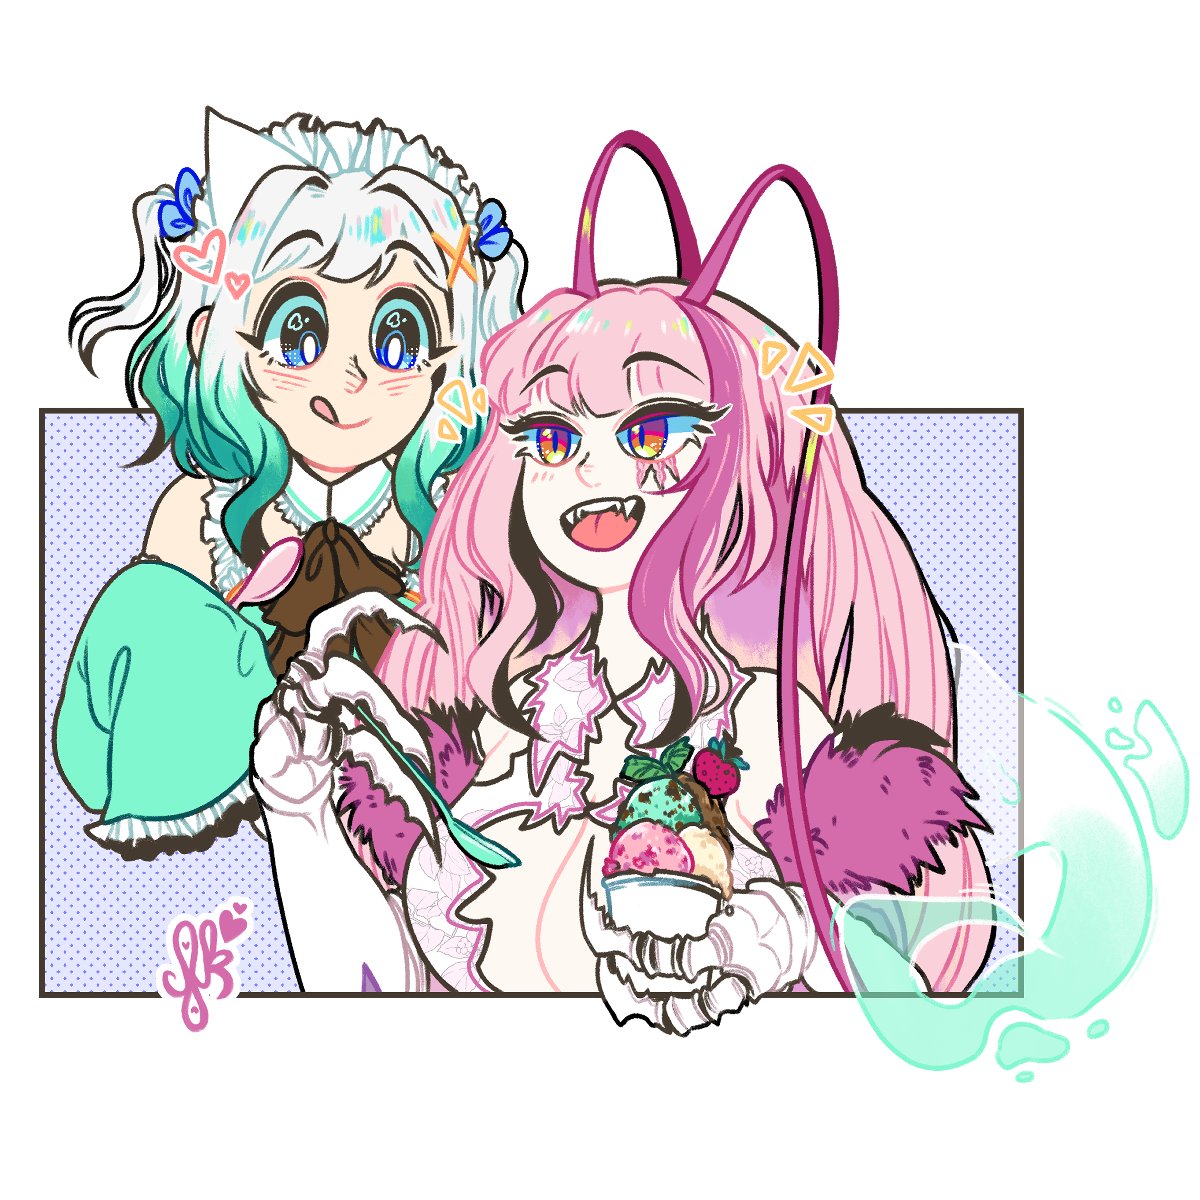 First up for designs I'm debuting at Offkai!
Mint and Matara sticker bc every time I see them together especially I crave ice-cream 😋🍨 (this is a joke I always want ice-cream)
#KanCraft #Fantography